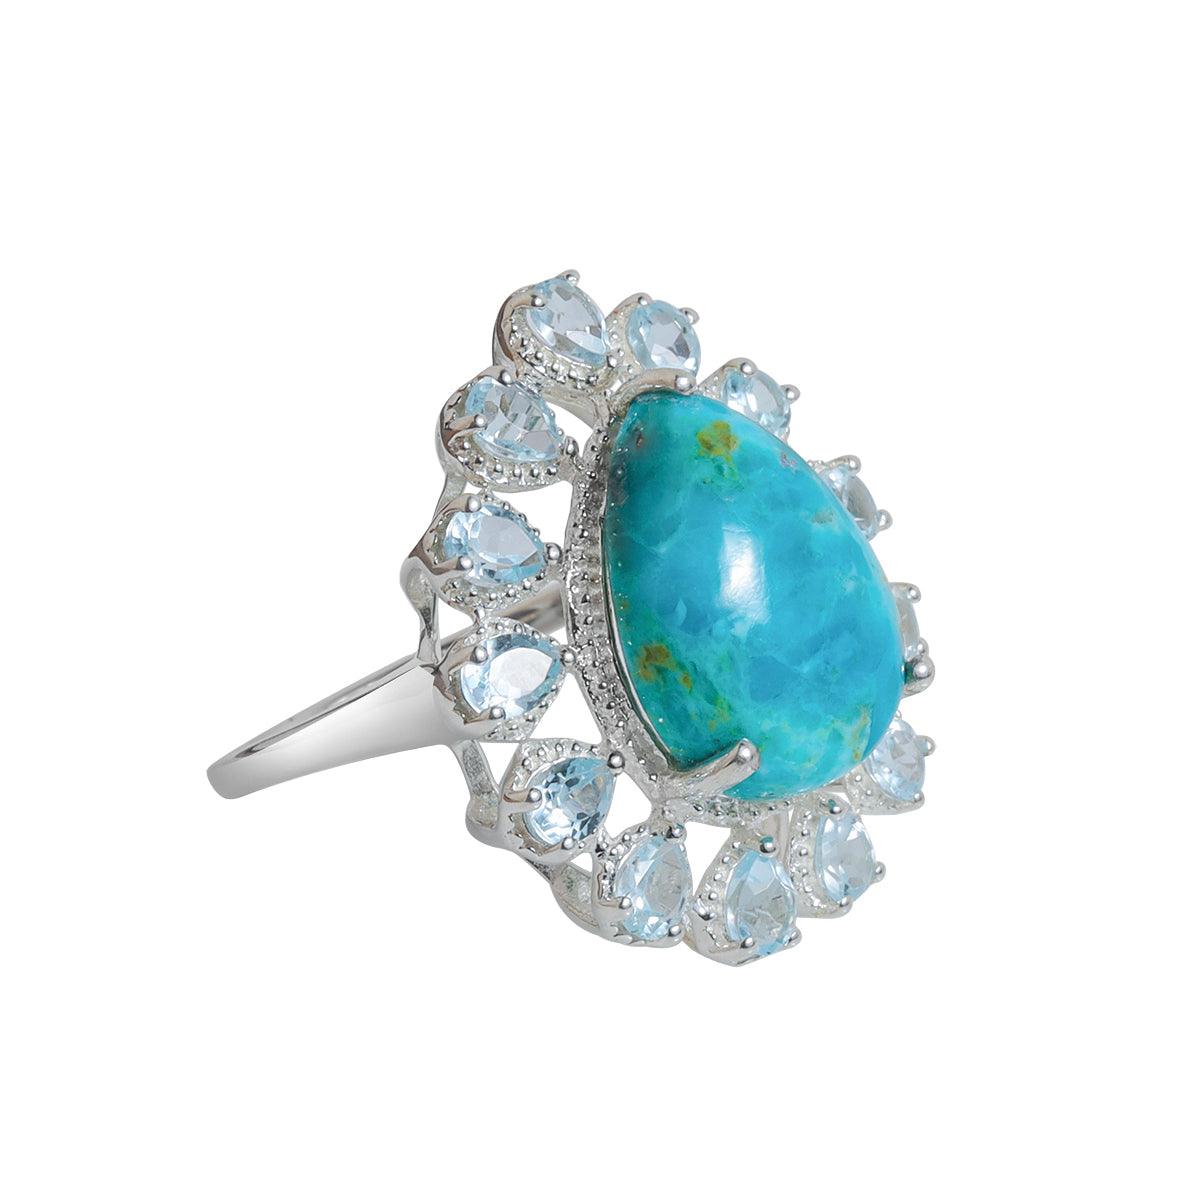 Turquoise & Sky Blue Topaz Solid 925 Sterling Silver Statement Ring - YoTreasure